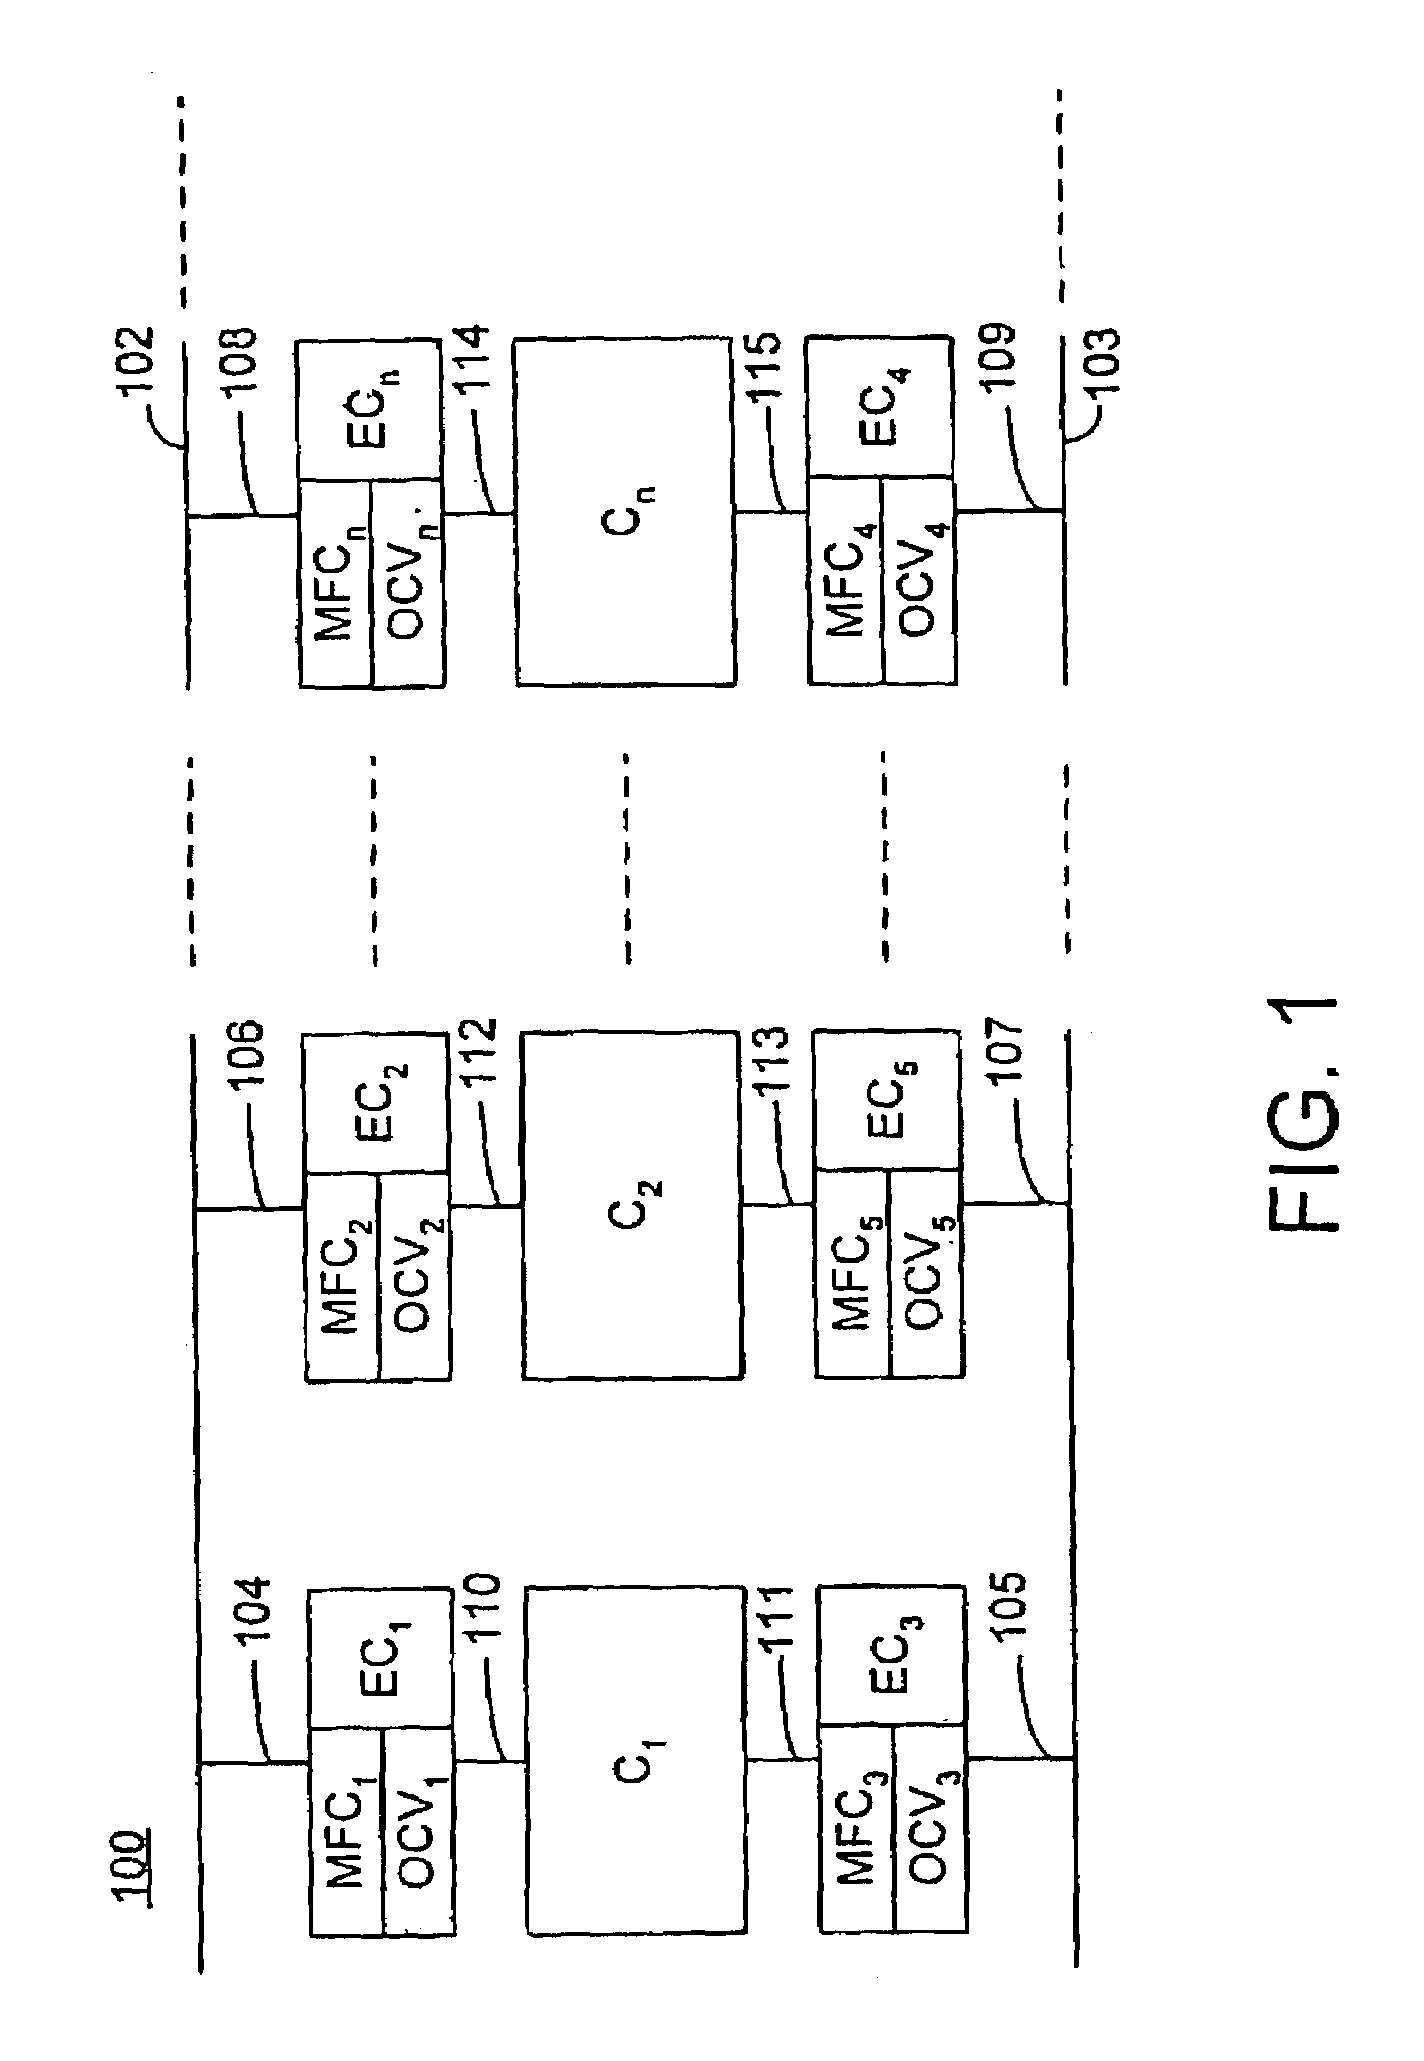 Apparatus and method for mass flow controller with embedded web server